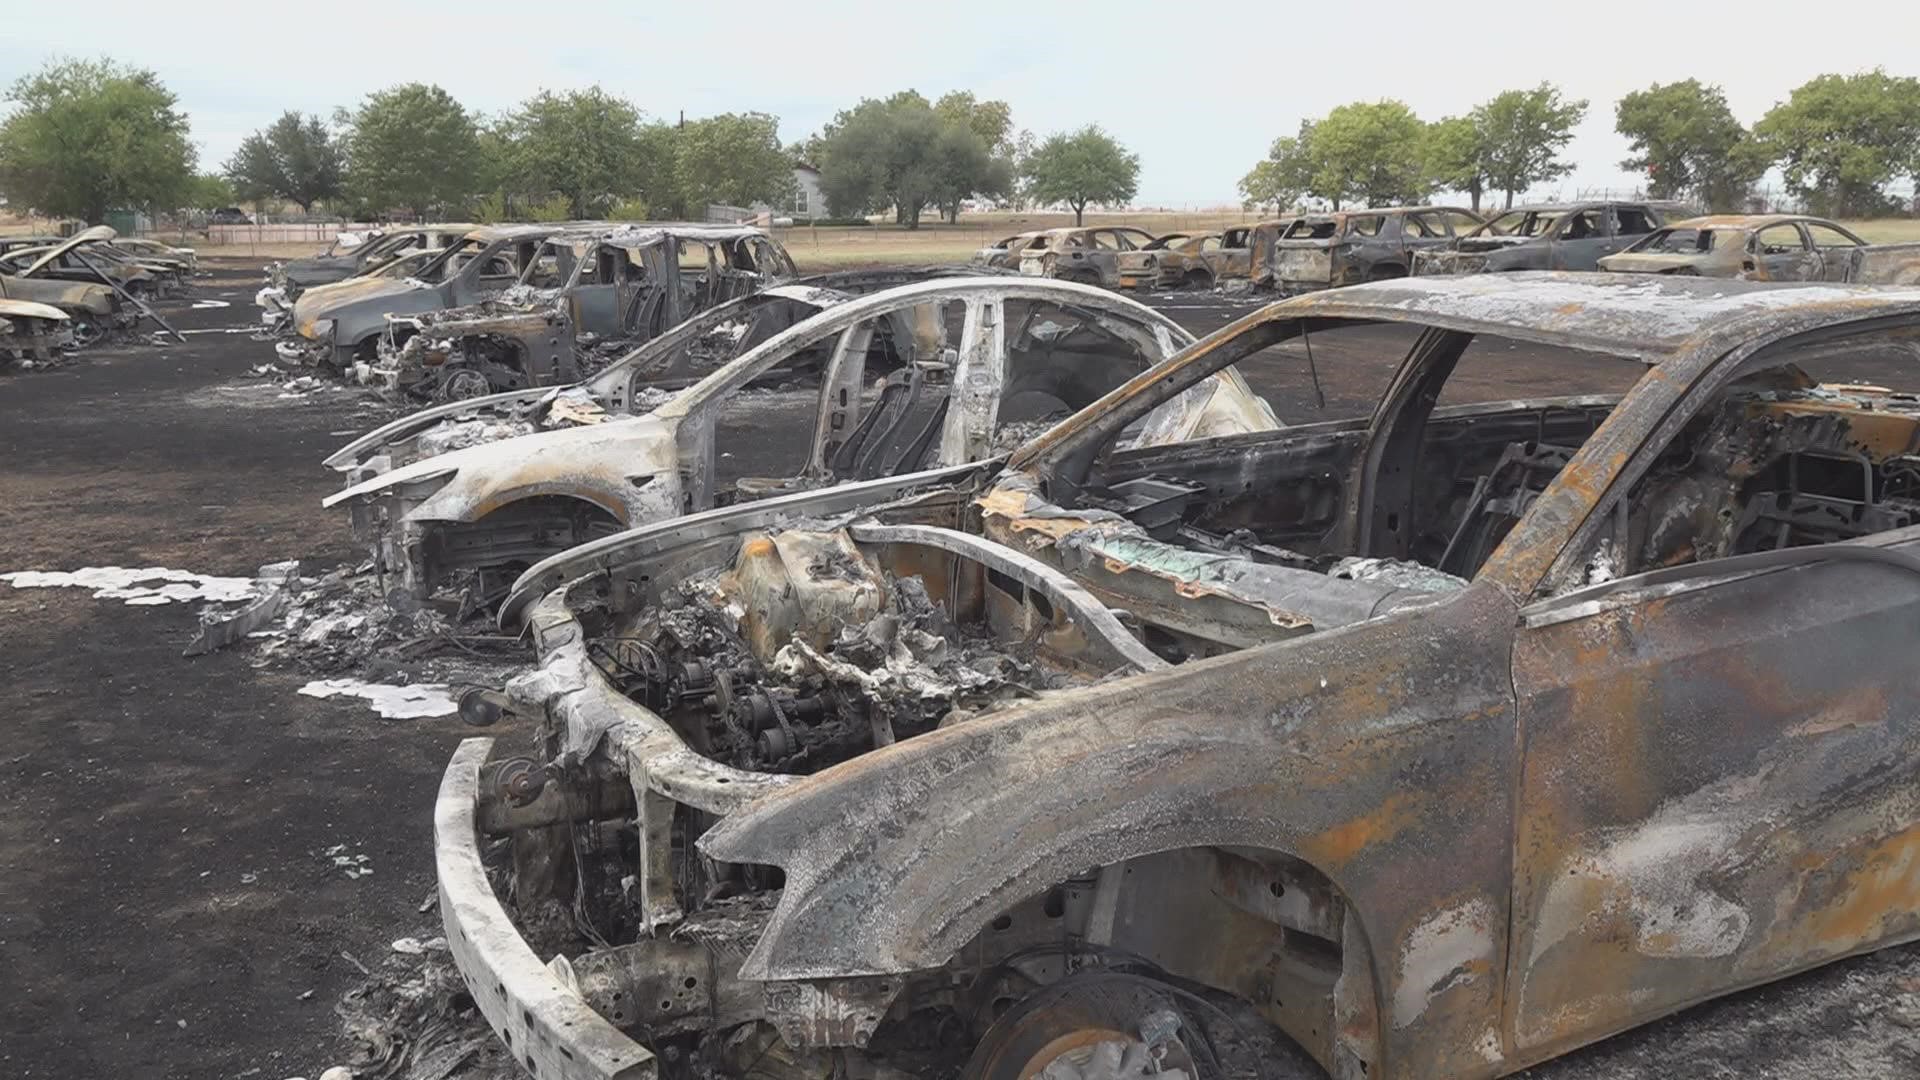 The farm will not be held liable for the fire, leaving insurance to pay for the destroyed vehicles.